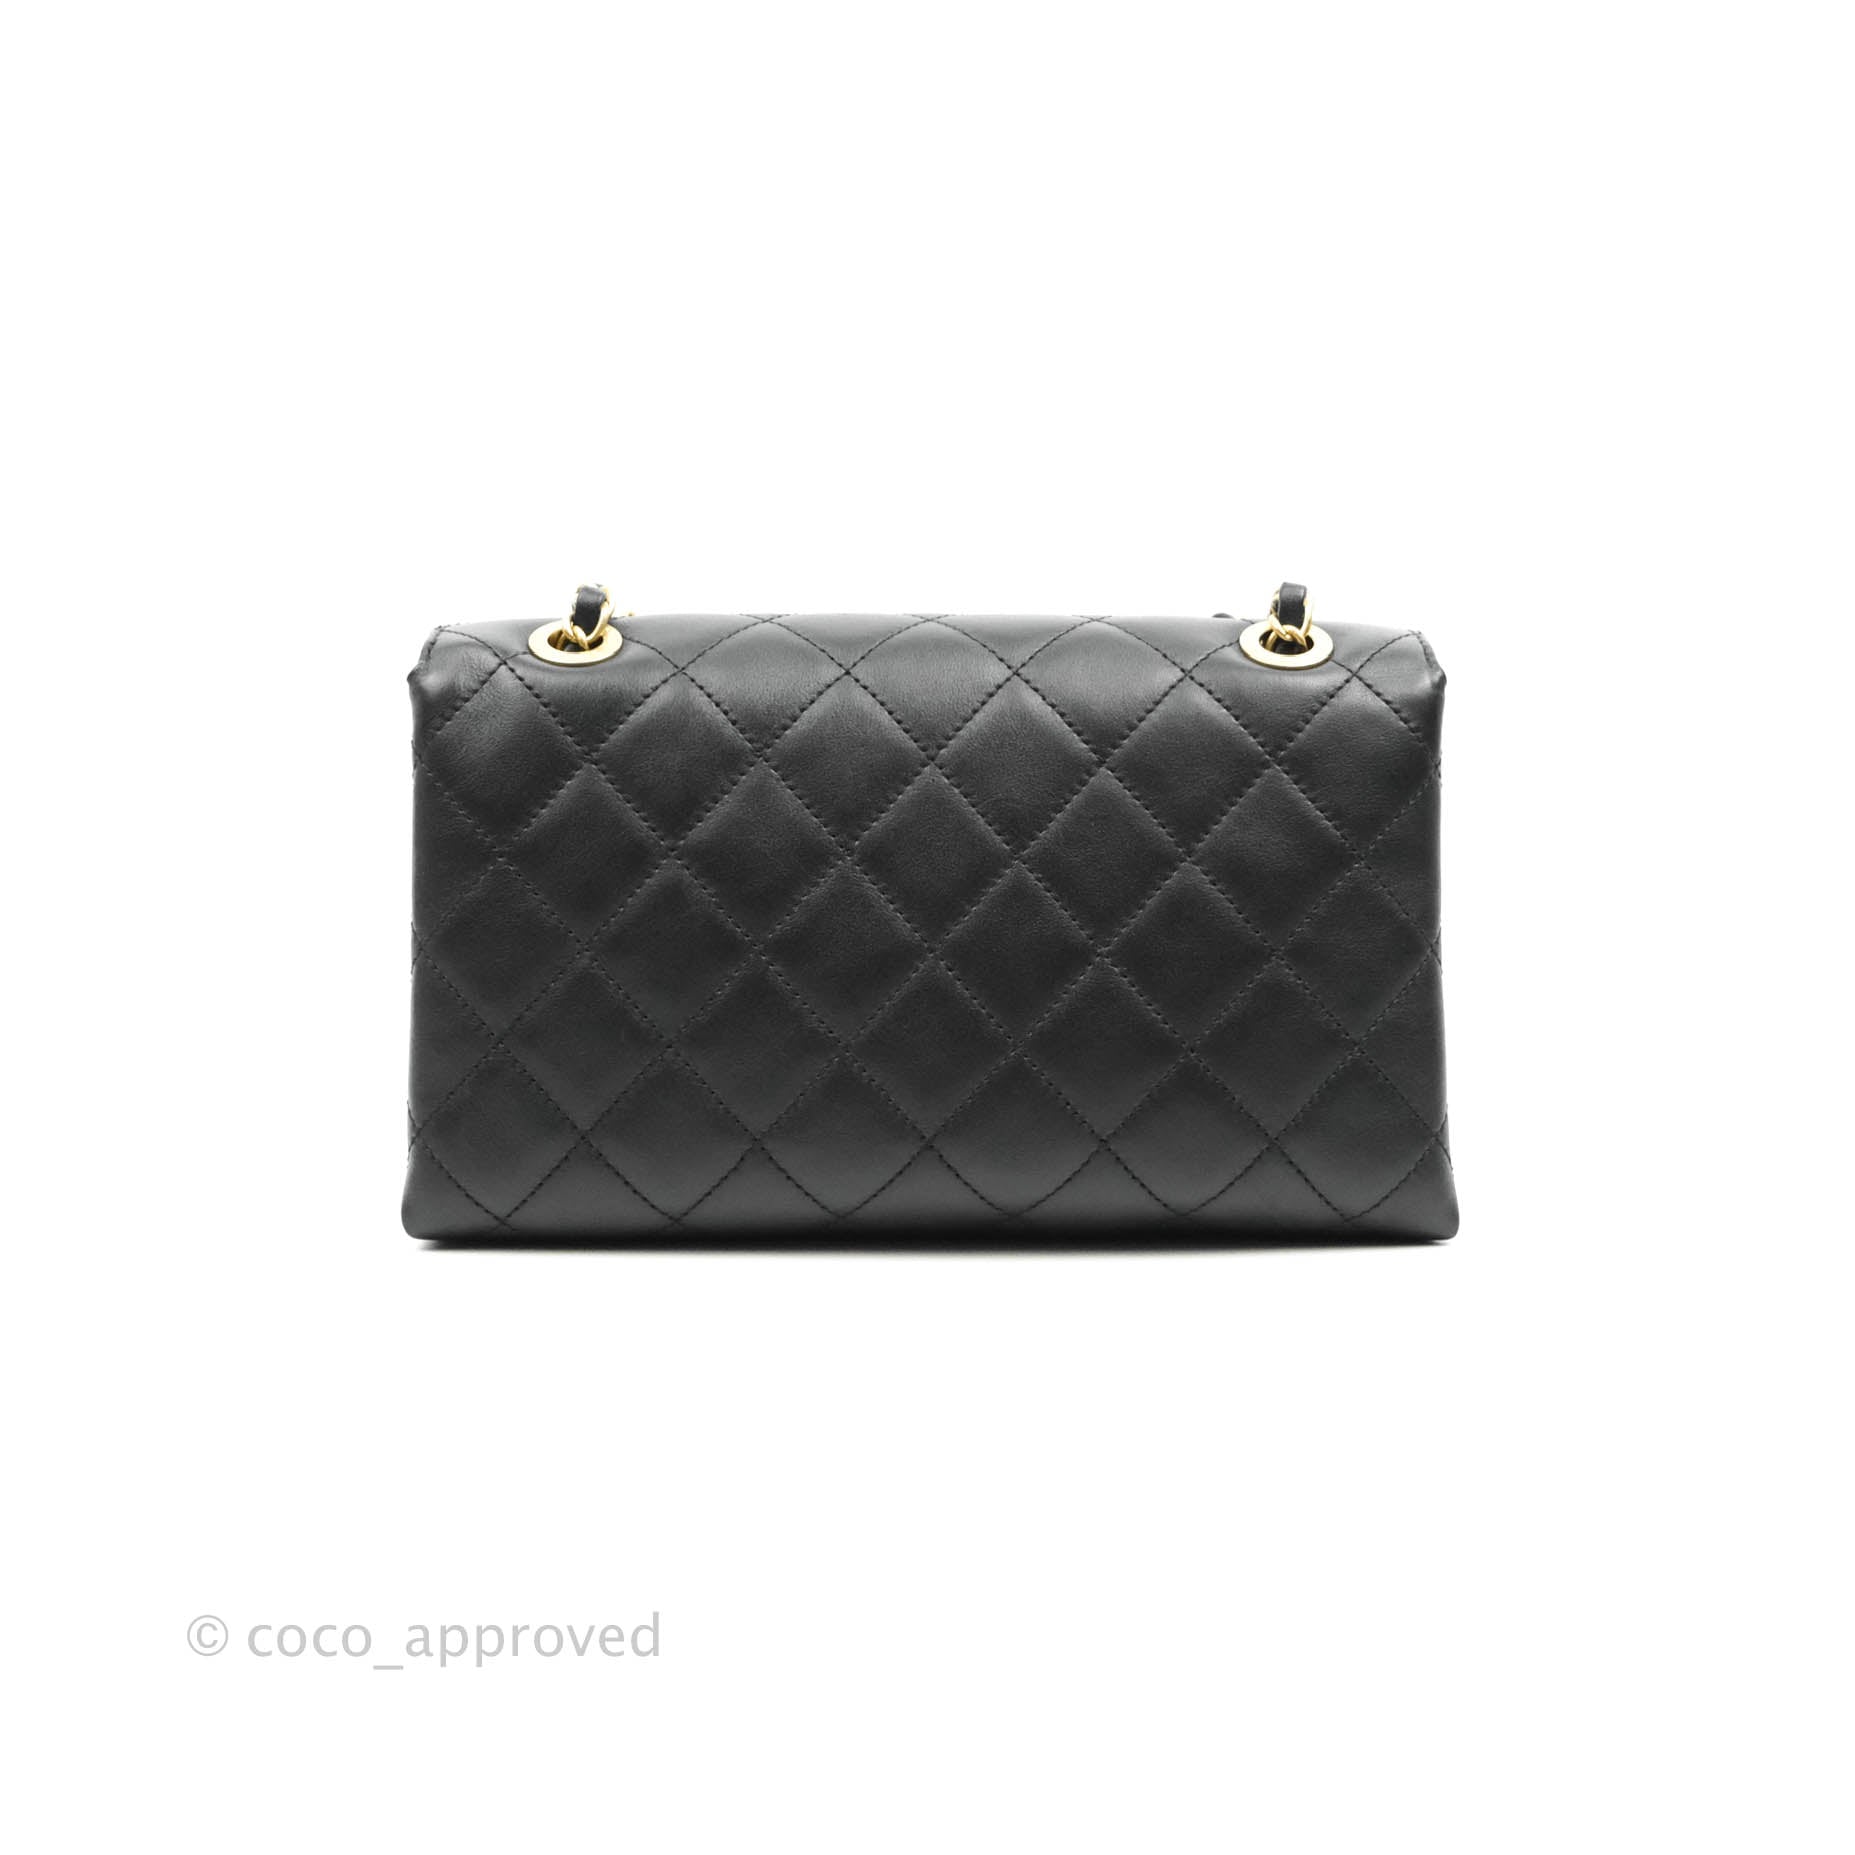 Chanel Logo Enchained Flap Bag Black Calfskin Gold Hardware – Coco Approved  Studio